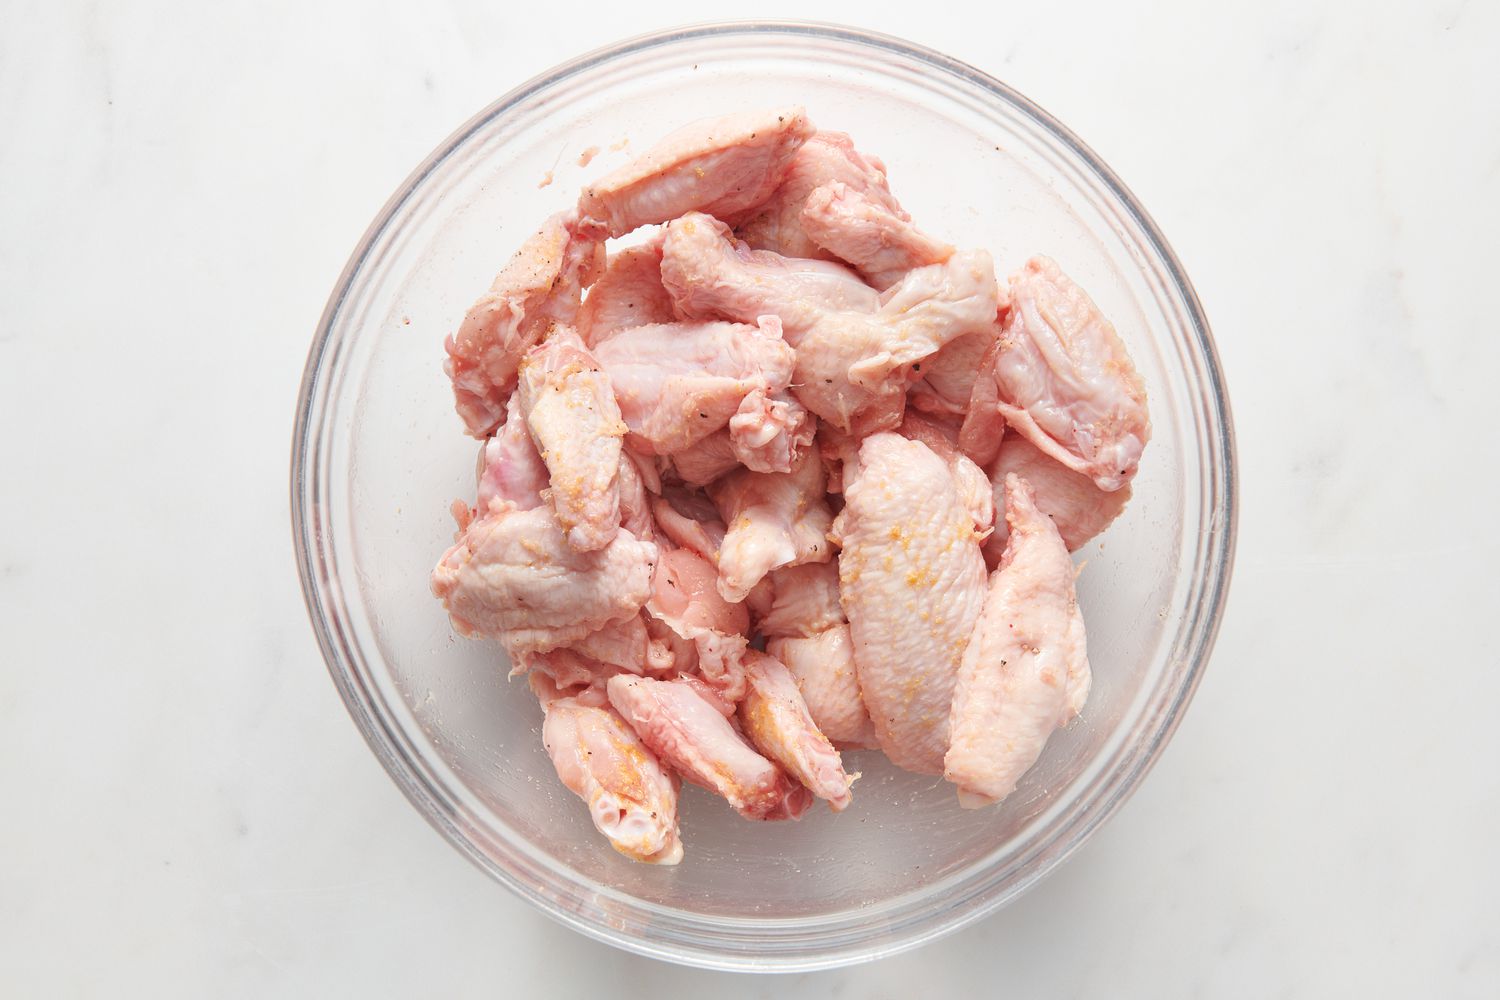 A large bowl of chicken wings coated with oil, salt, pepper, and garlic powder